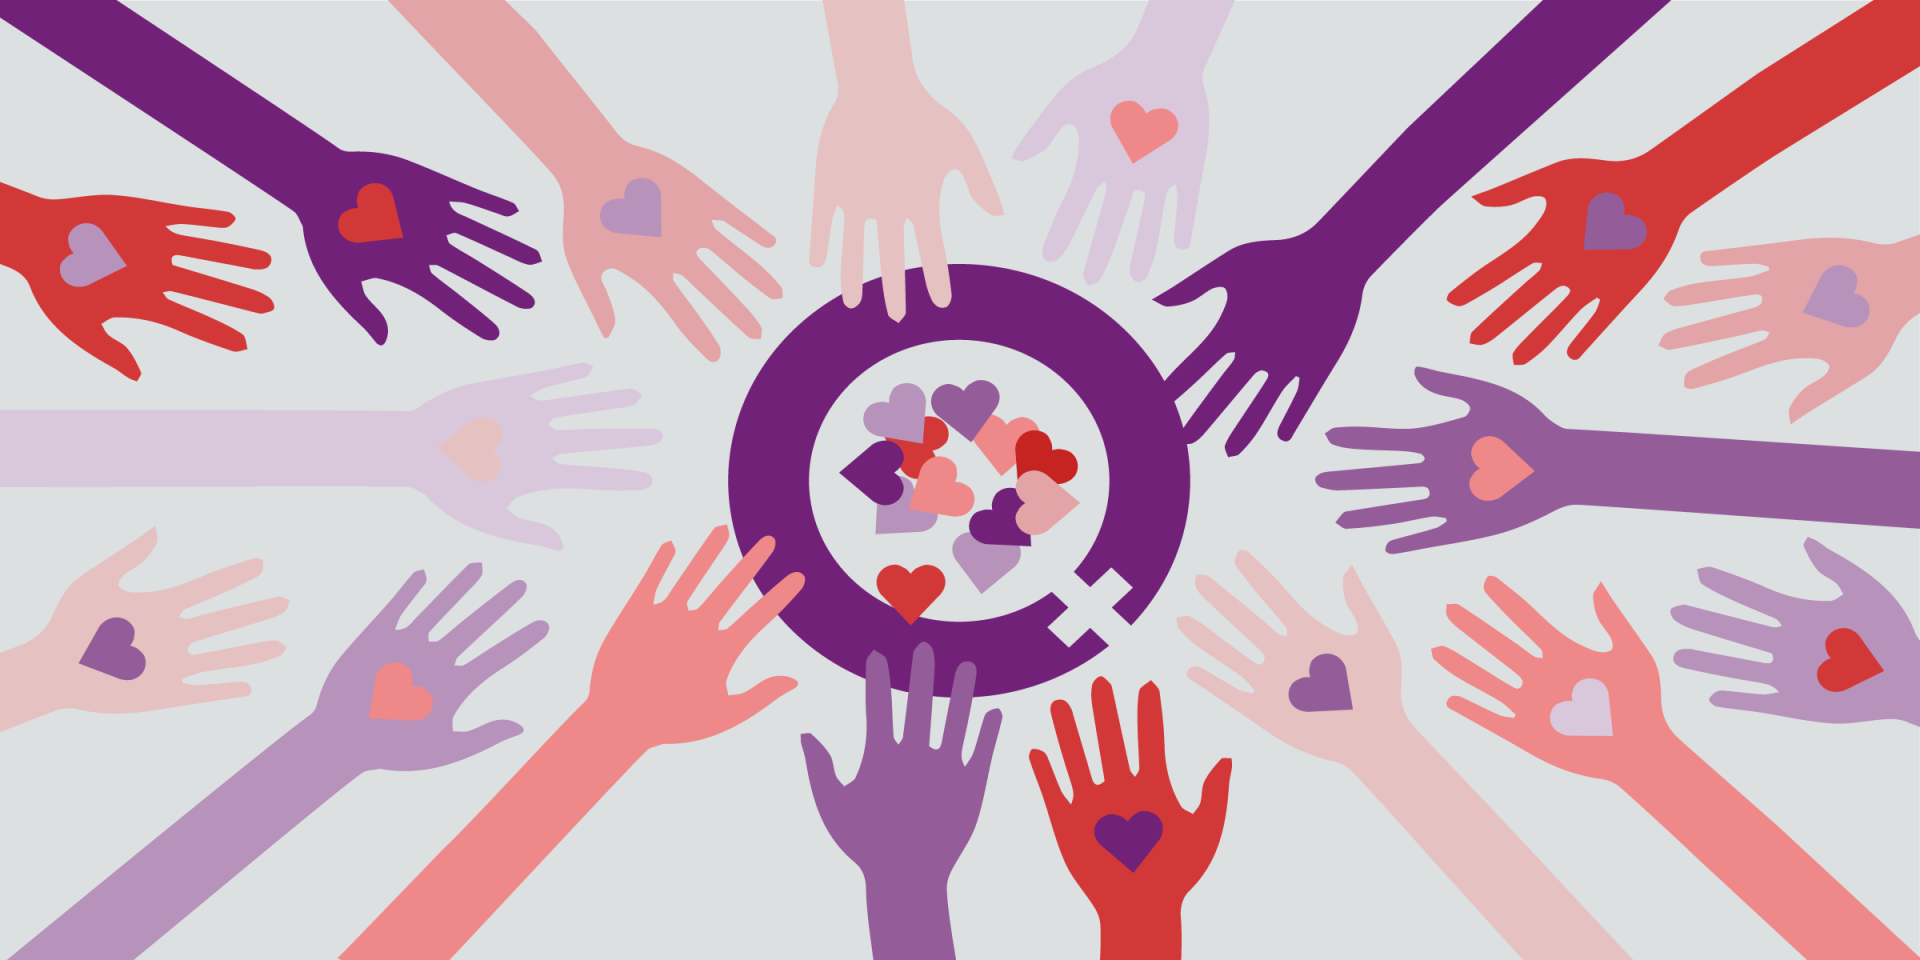 Top women’s issues and organizations in need of support